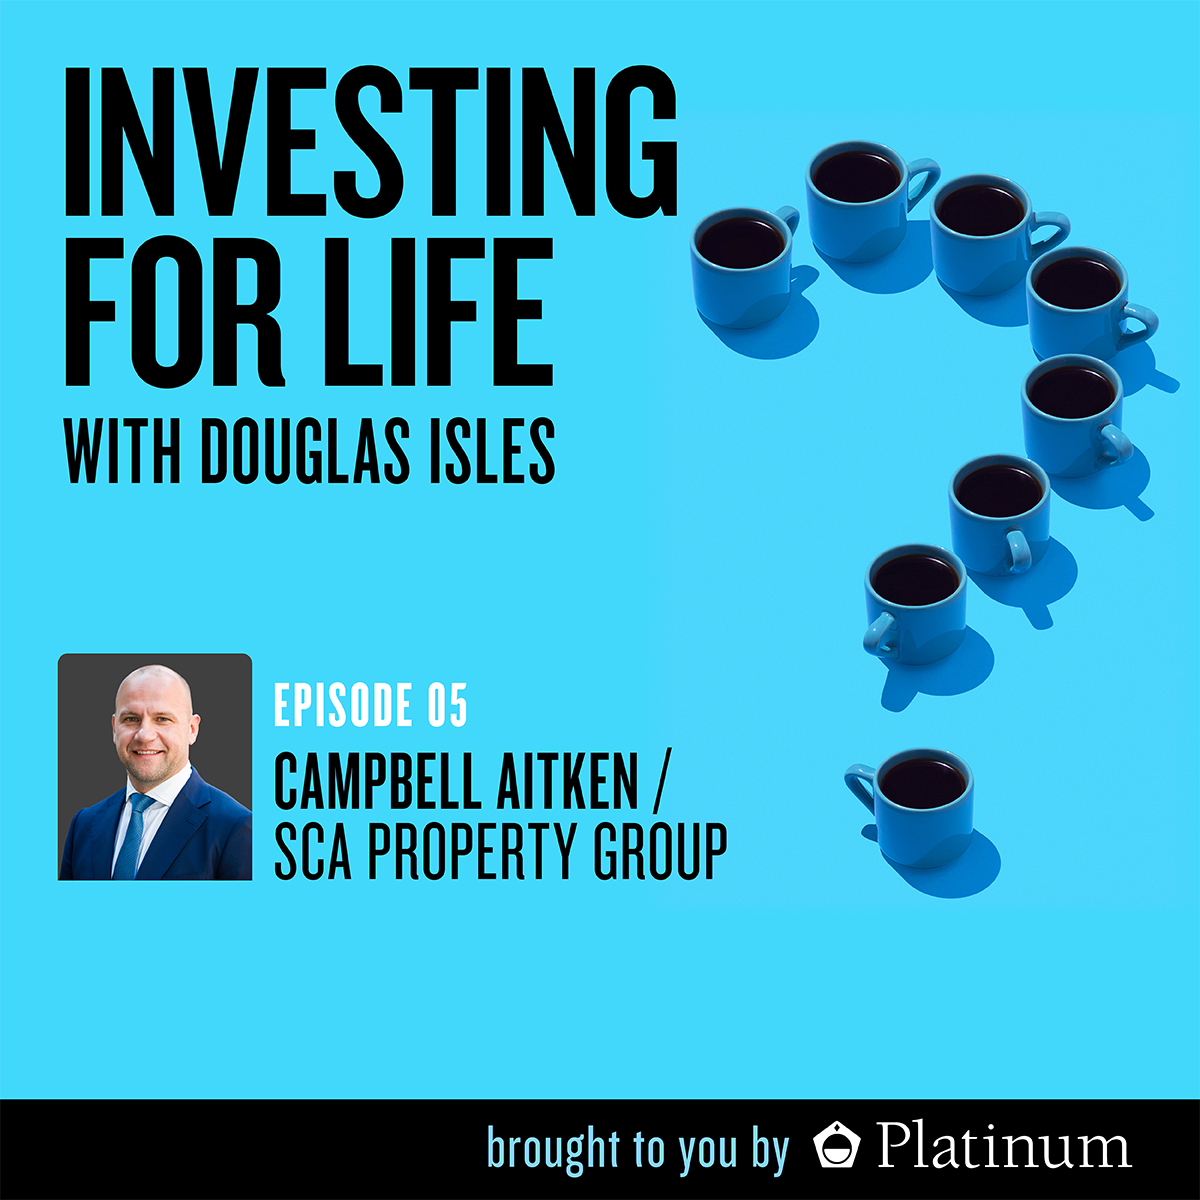 Campbell Aitken, Chief Investment Officer @ SCA Property Group.